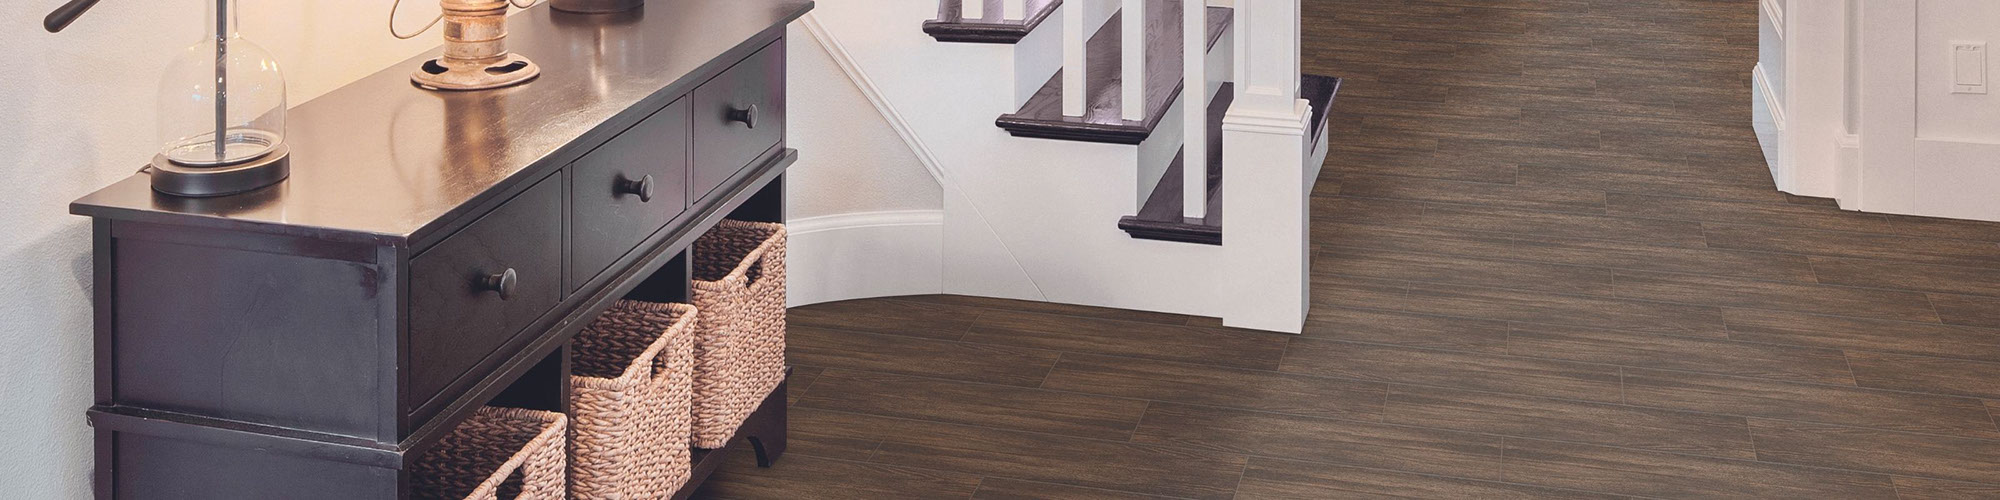 Residential foyer with floor tile that looks like dark wood flooring, dark wood entry table with wicker baskets, staircase with dark wood step & white railing.